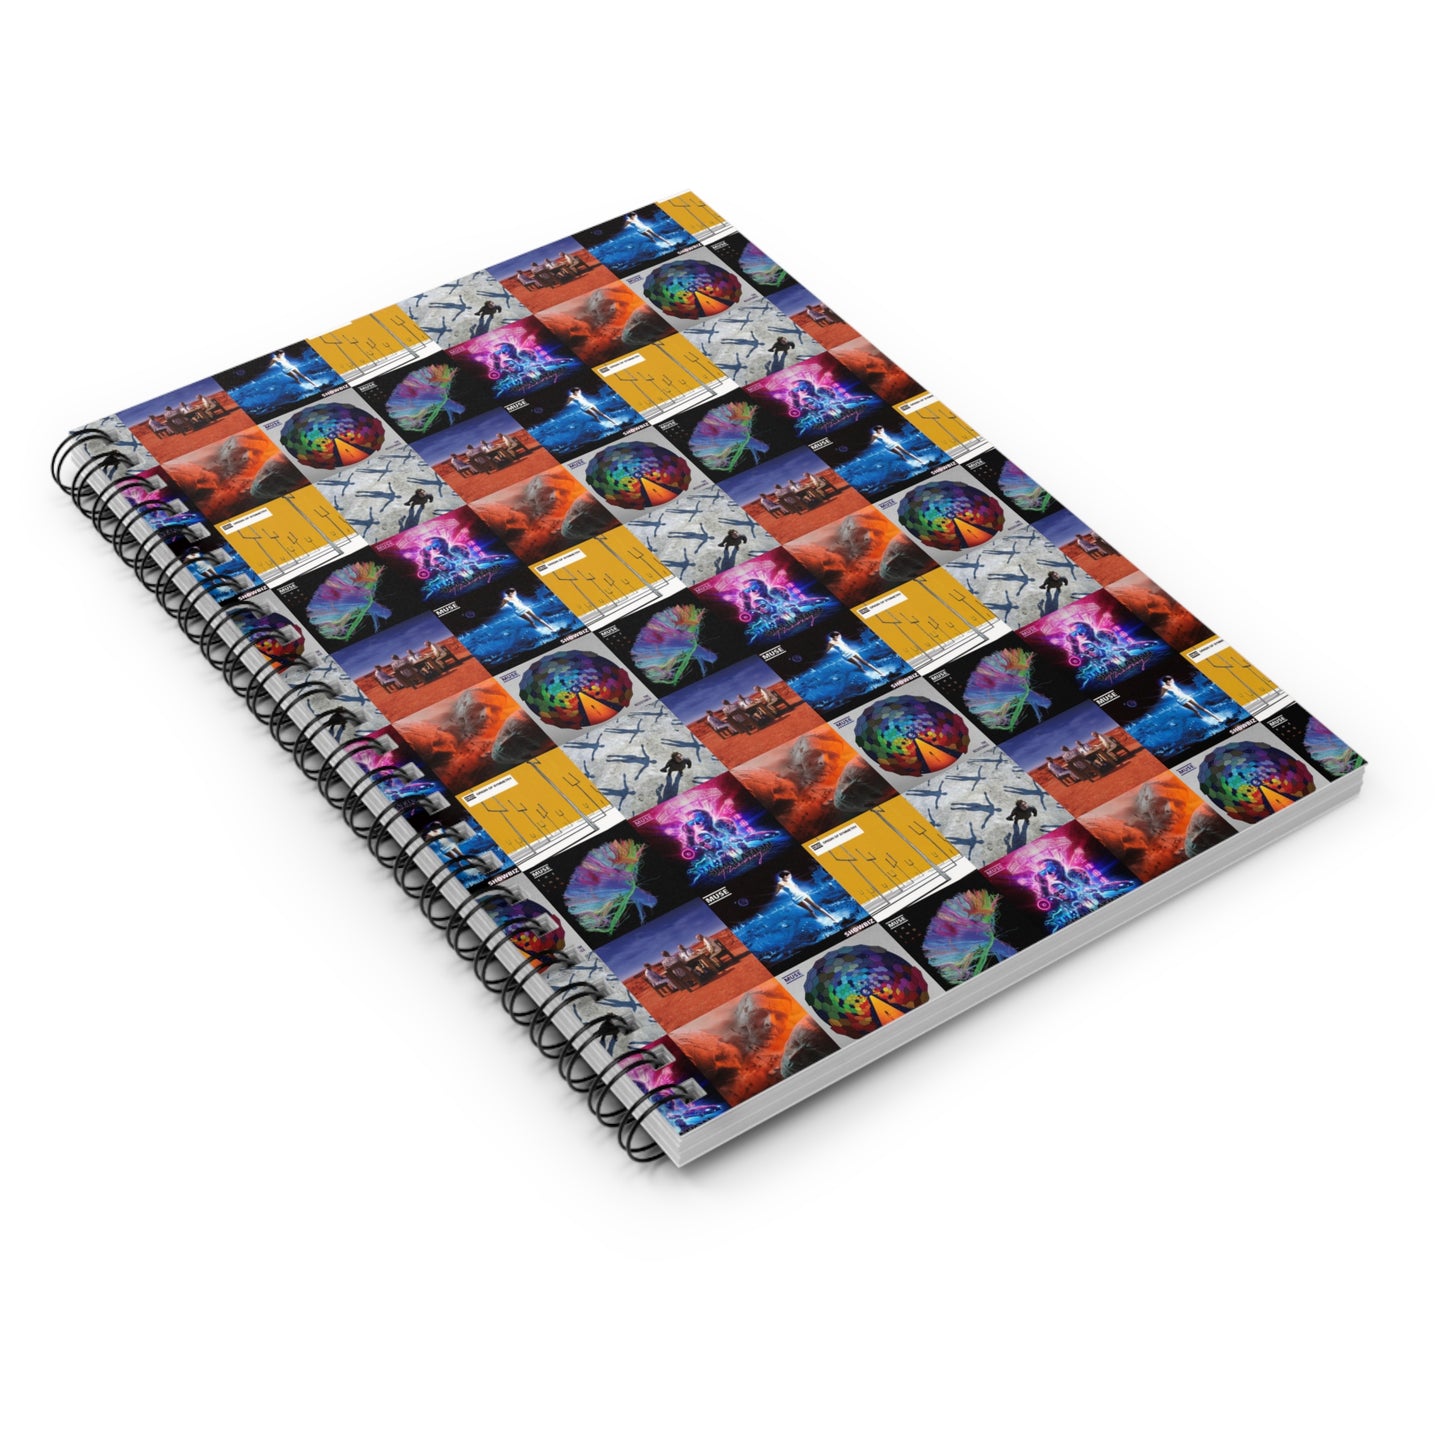 Muse Album Cover Collage Ruled Line Spiral Notebook